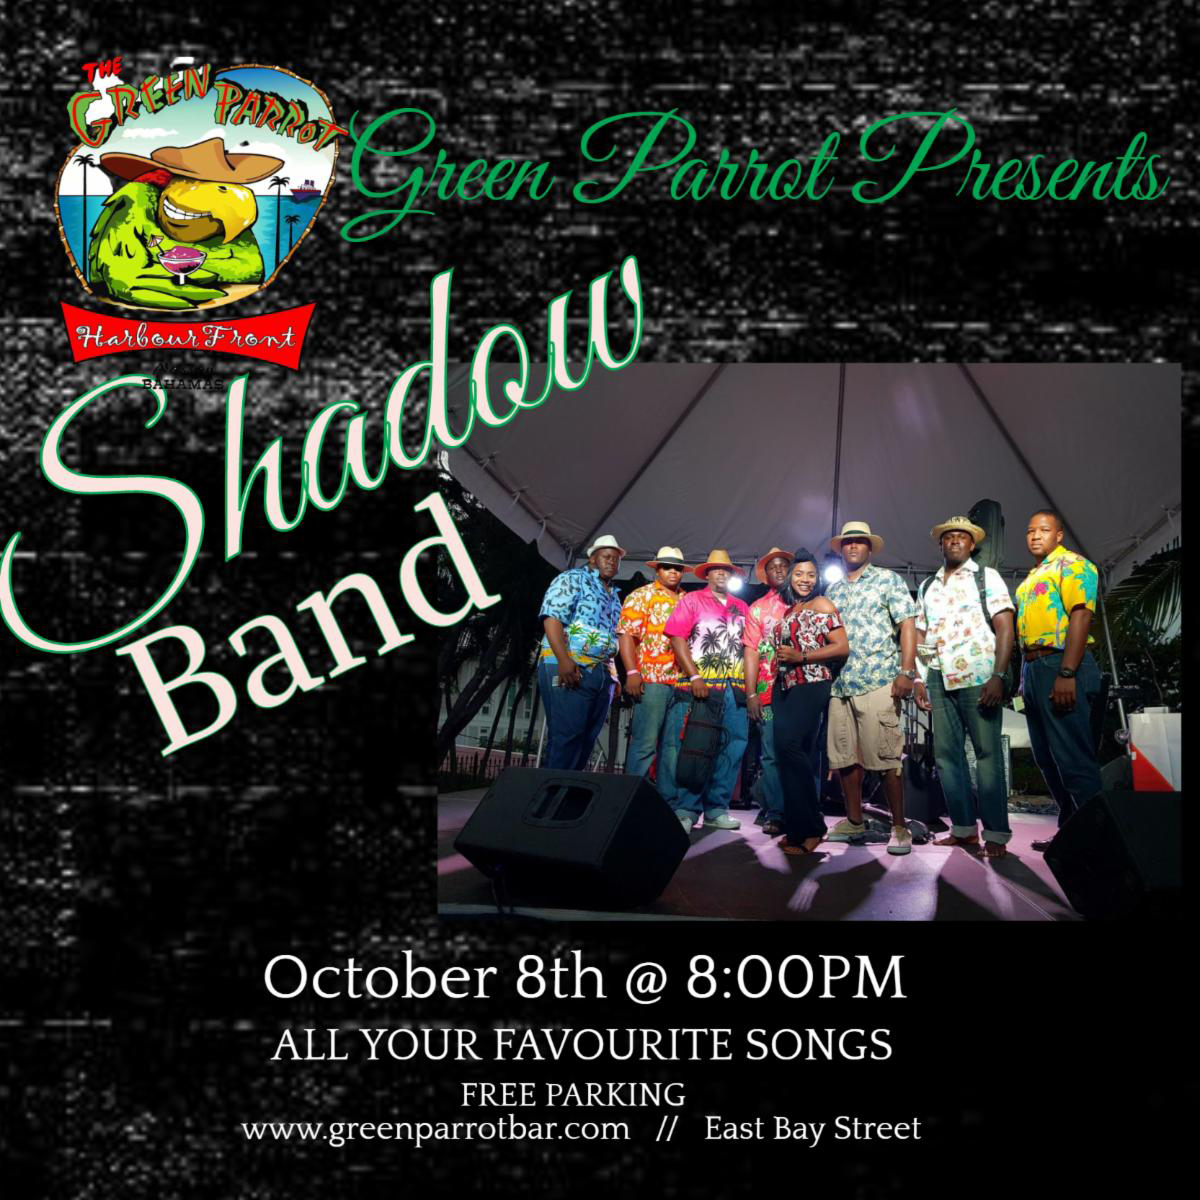 The Green Parrot presents Shadow Band